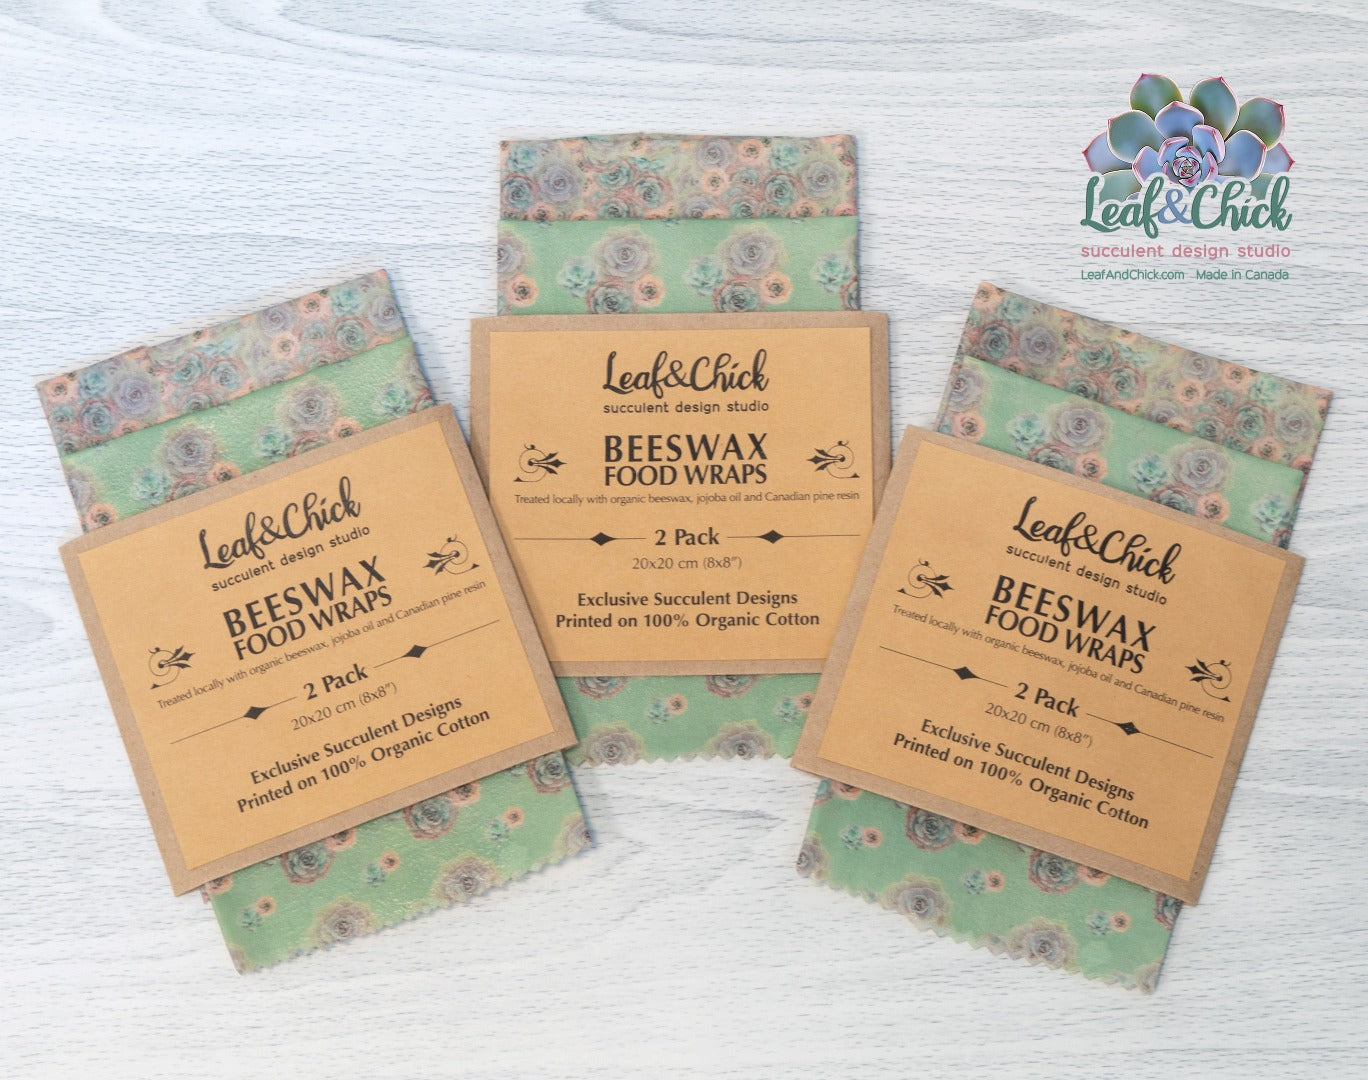 2 pack of beeswax food wraps from Leaf & Chick